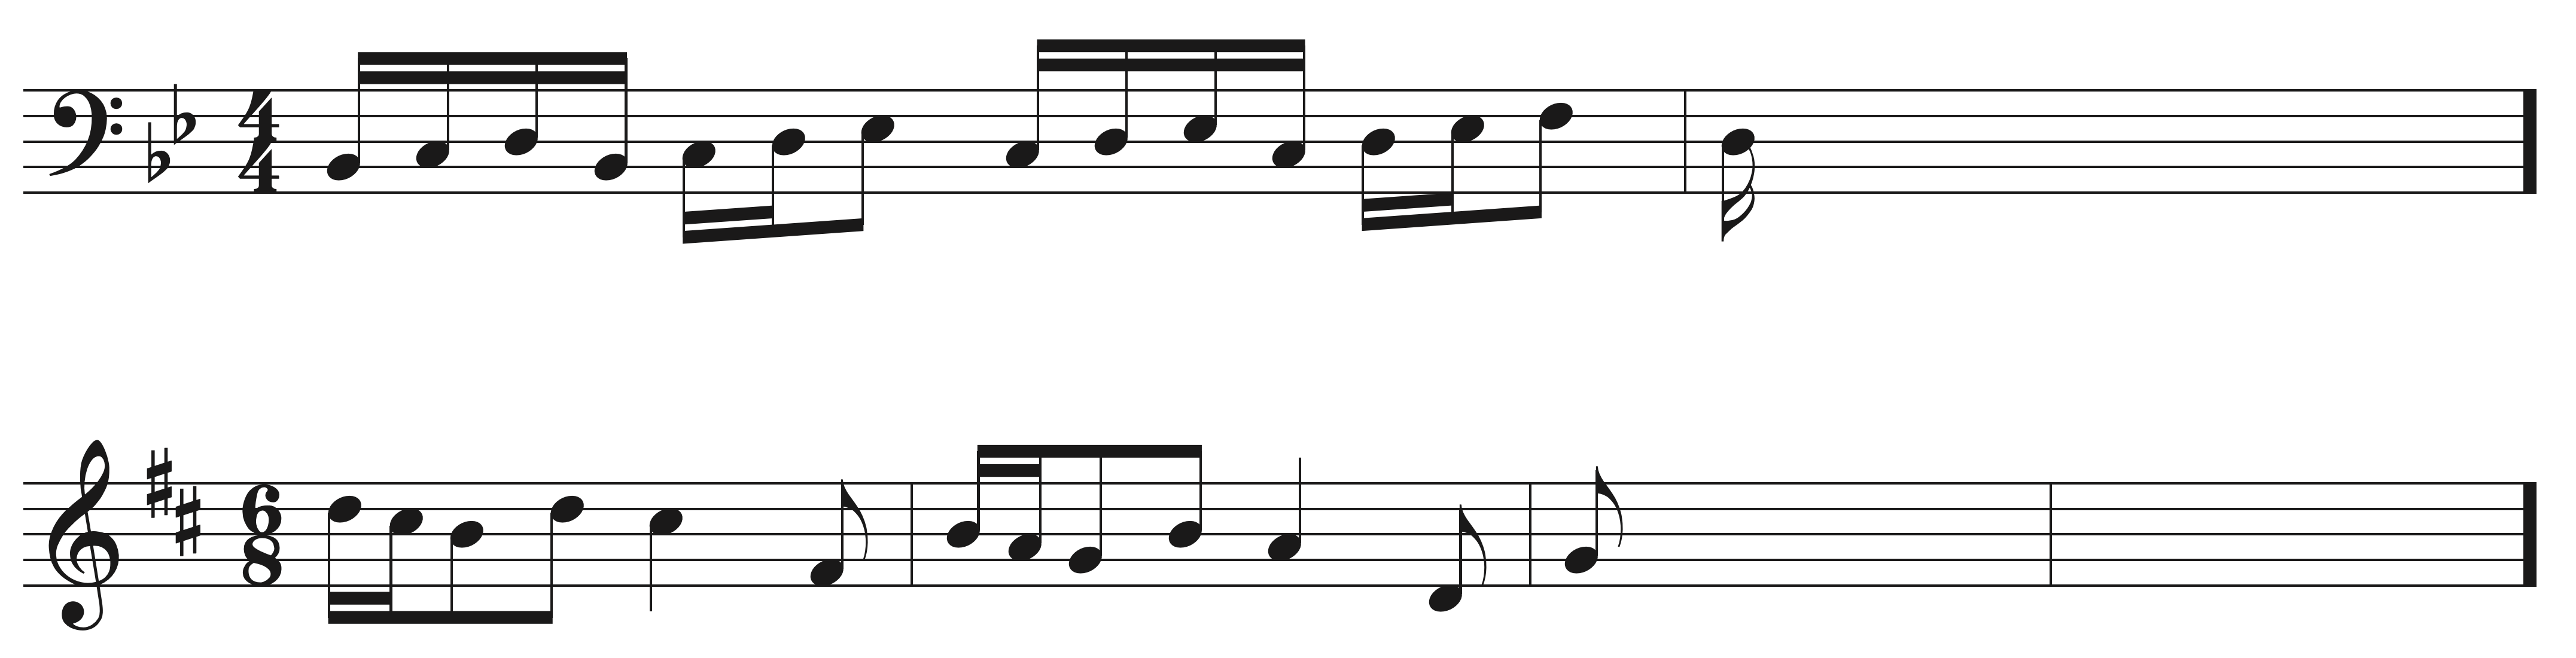 Melodic Sequences Sight Singing exercise example